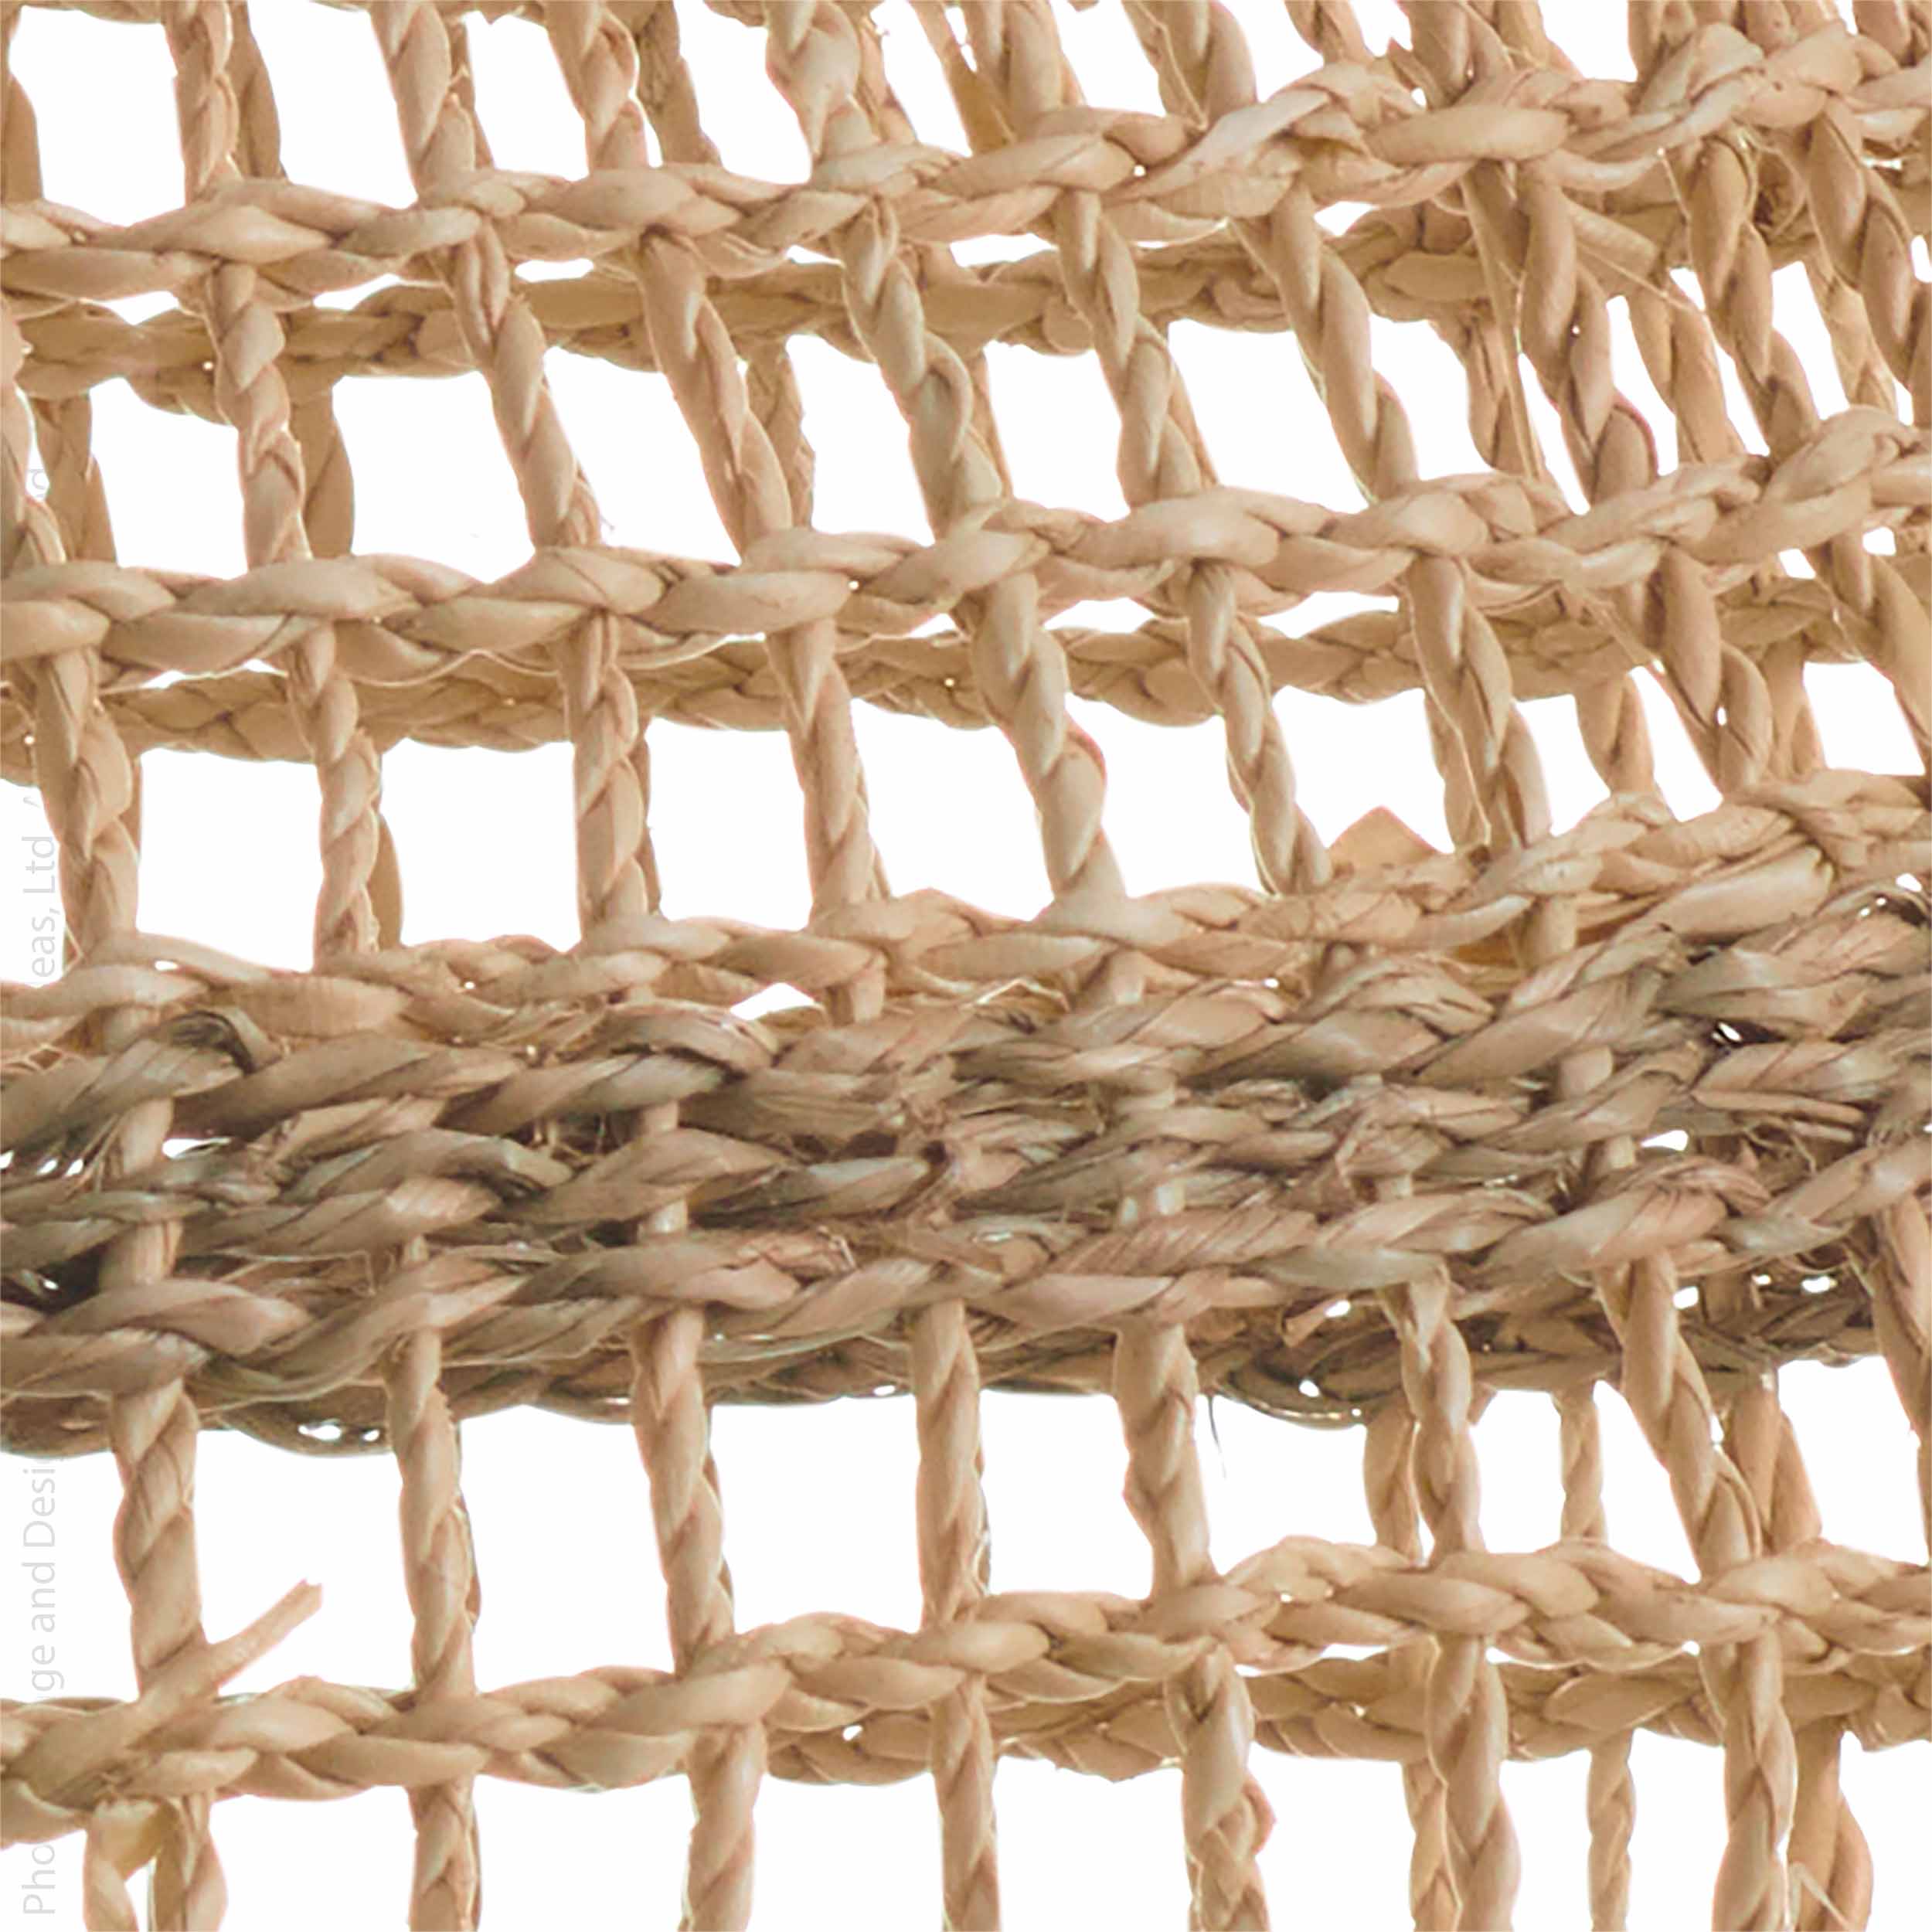 Nevis™  Woven Palm Leaf and Seagrass Lampshade